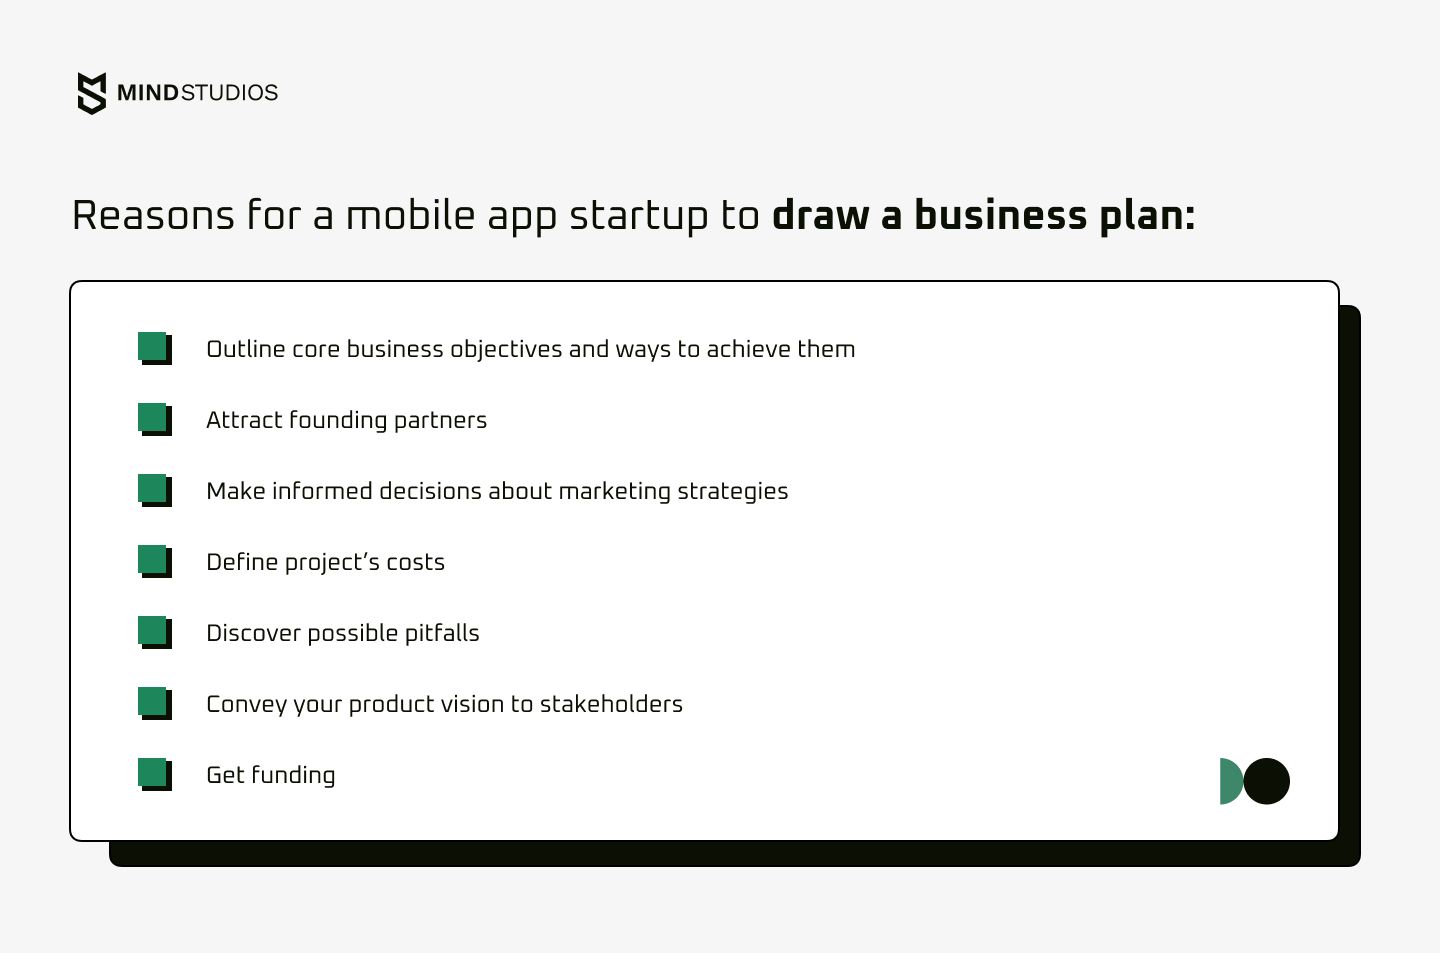 Reasons for a mobile app startup to draw a business plan